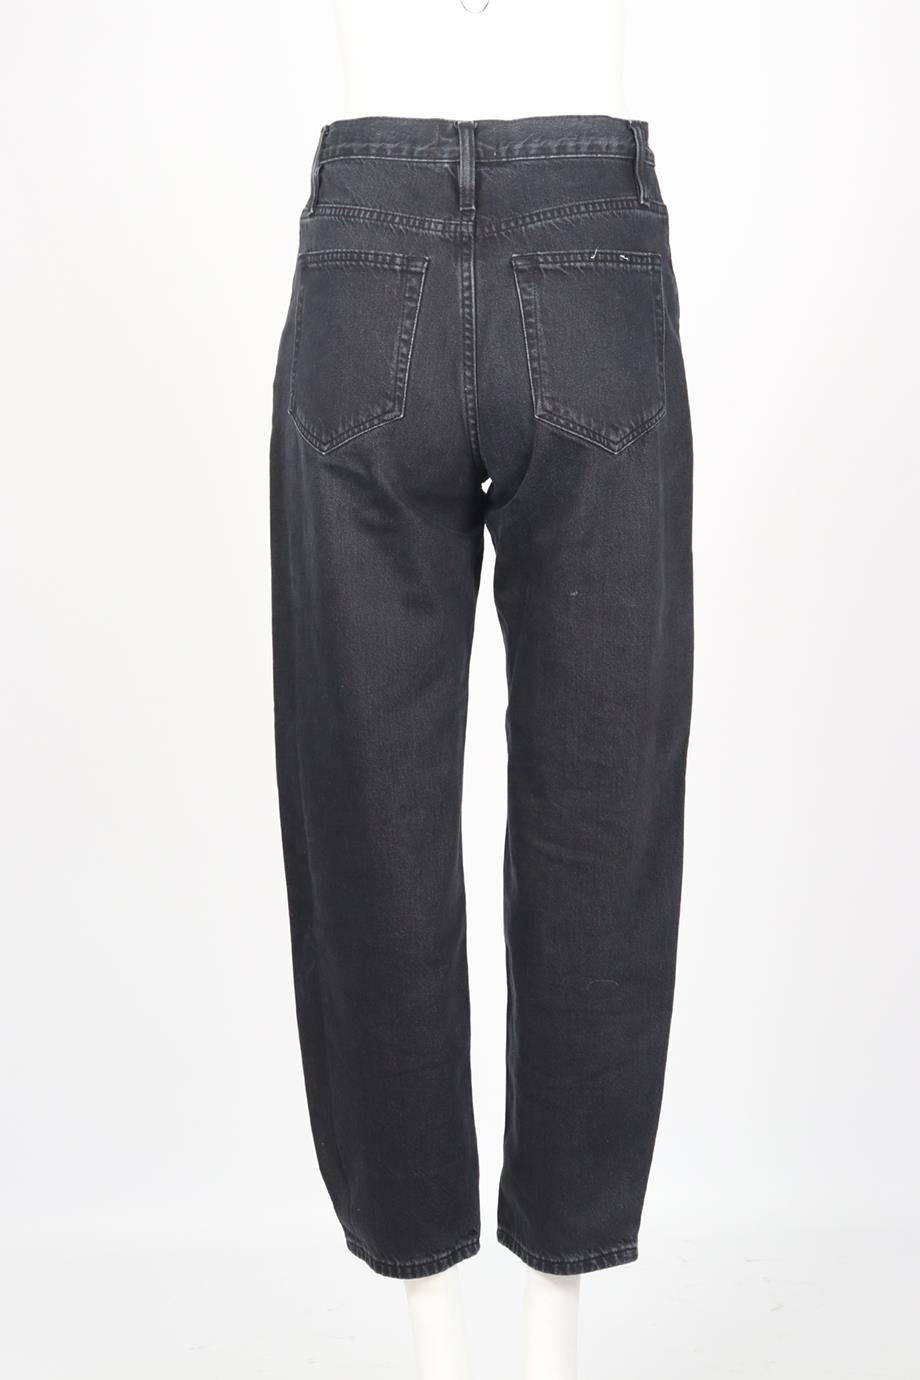 FRAME HIGH RISE TAPERED JEANS W26 UK 8